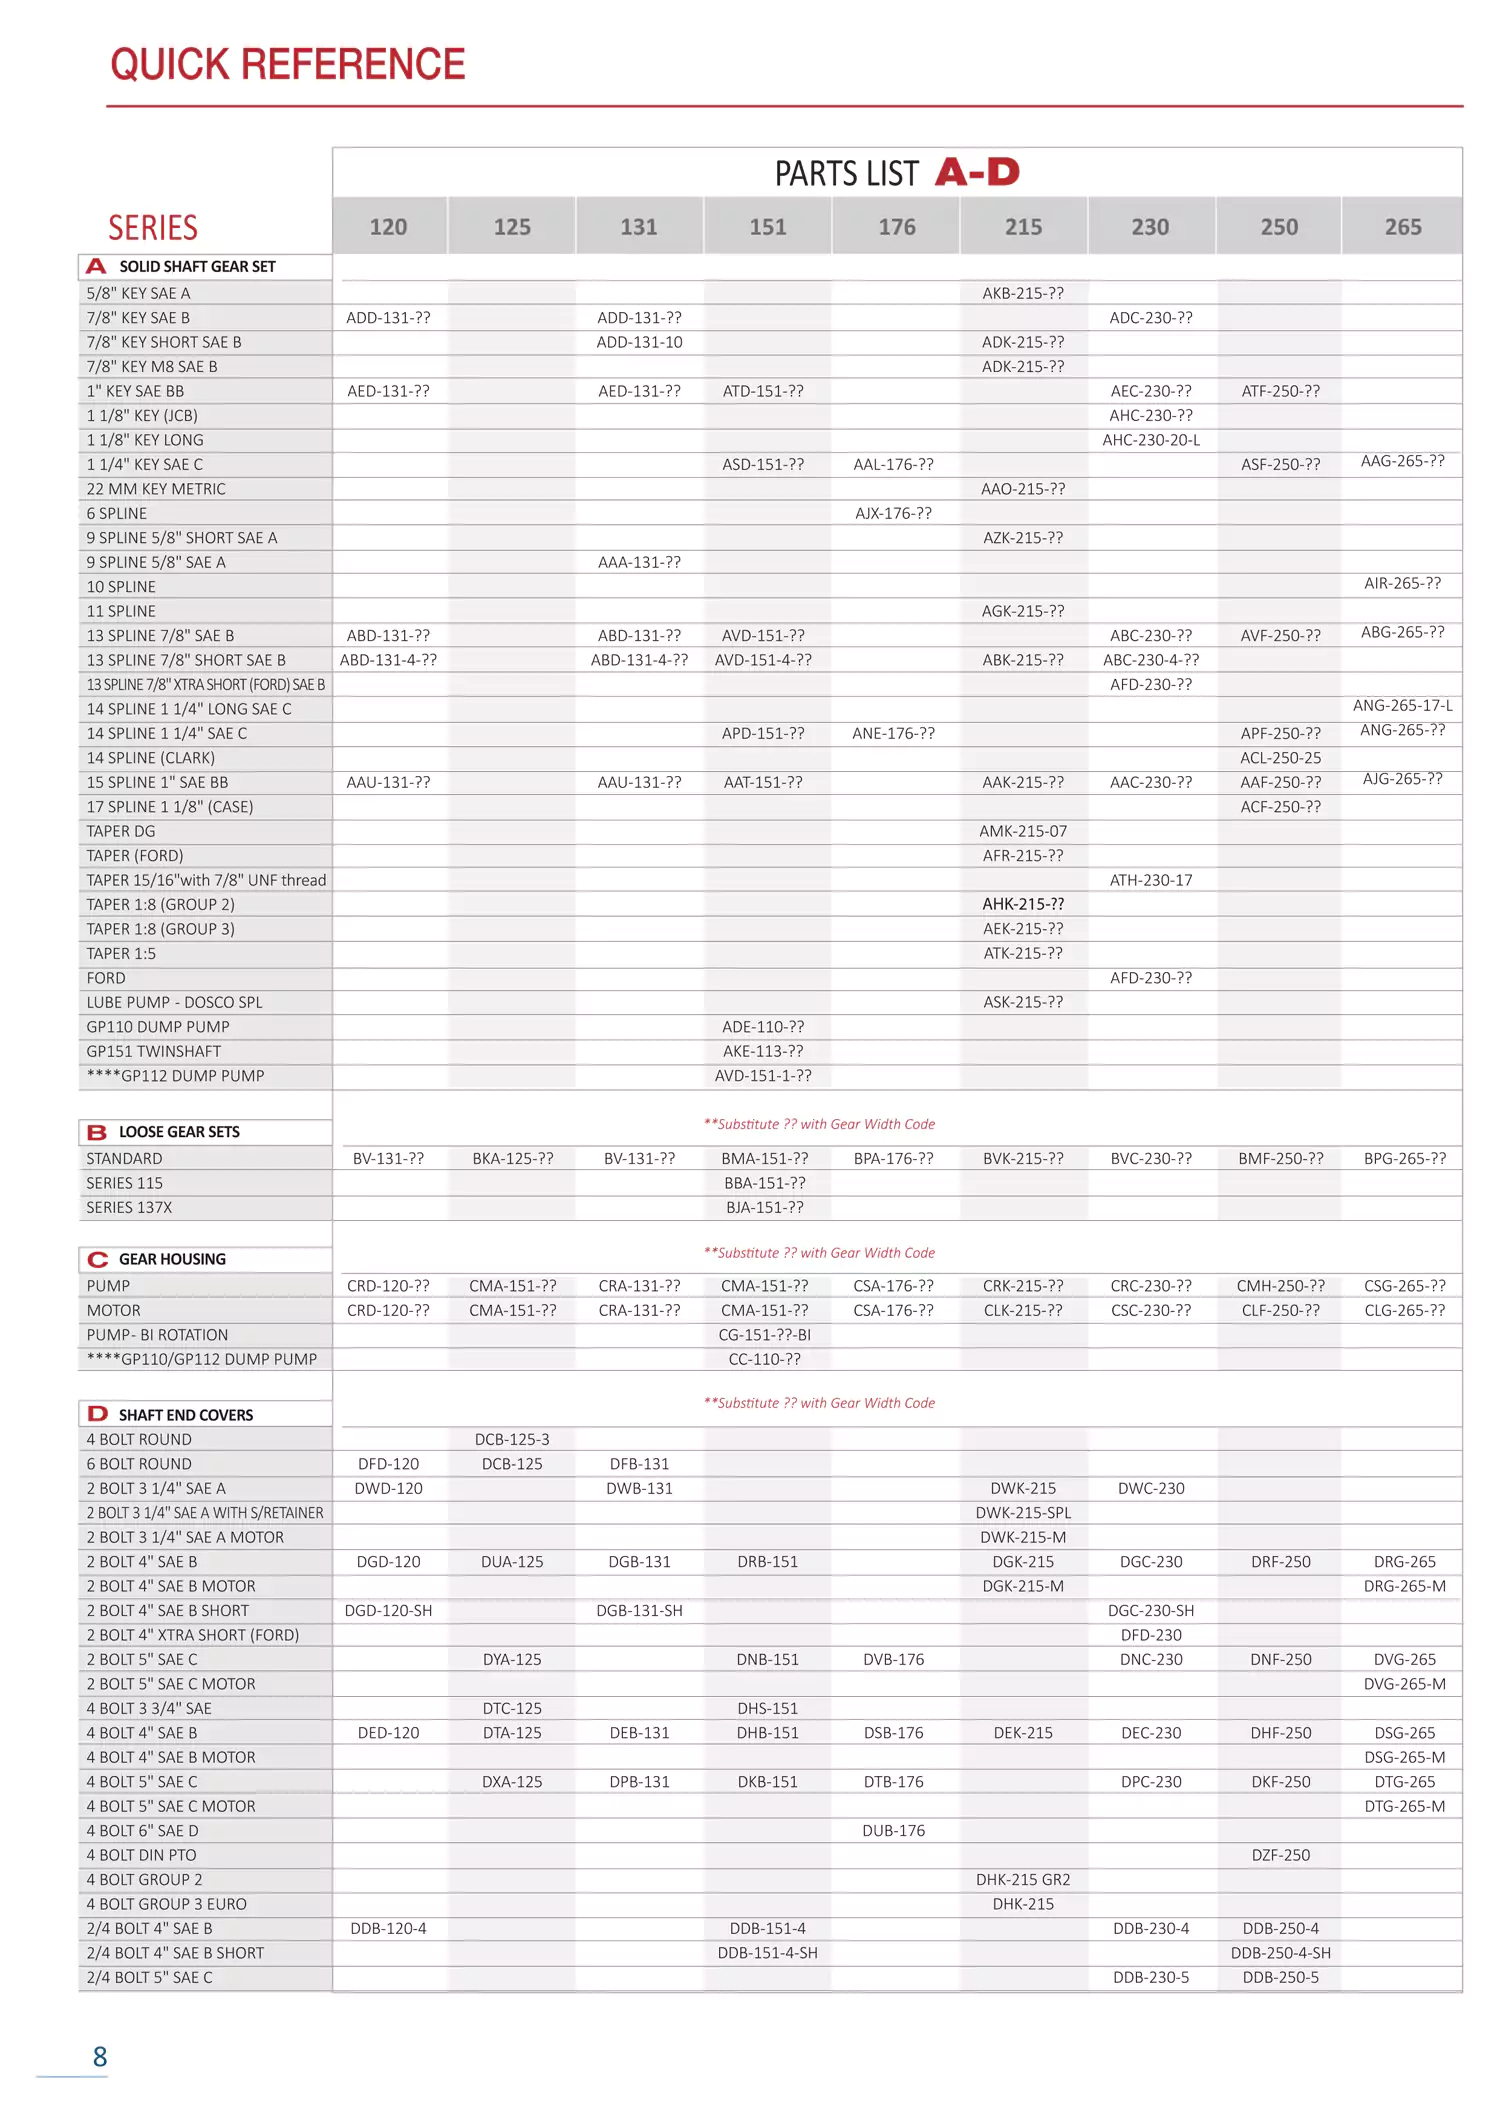 Page-08 - Quick Reference - Parts List A-D